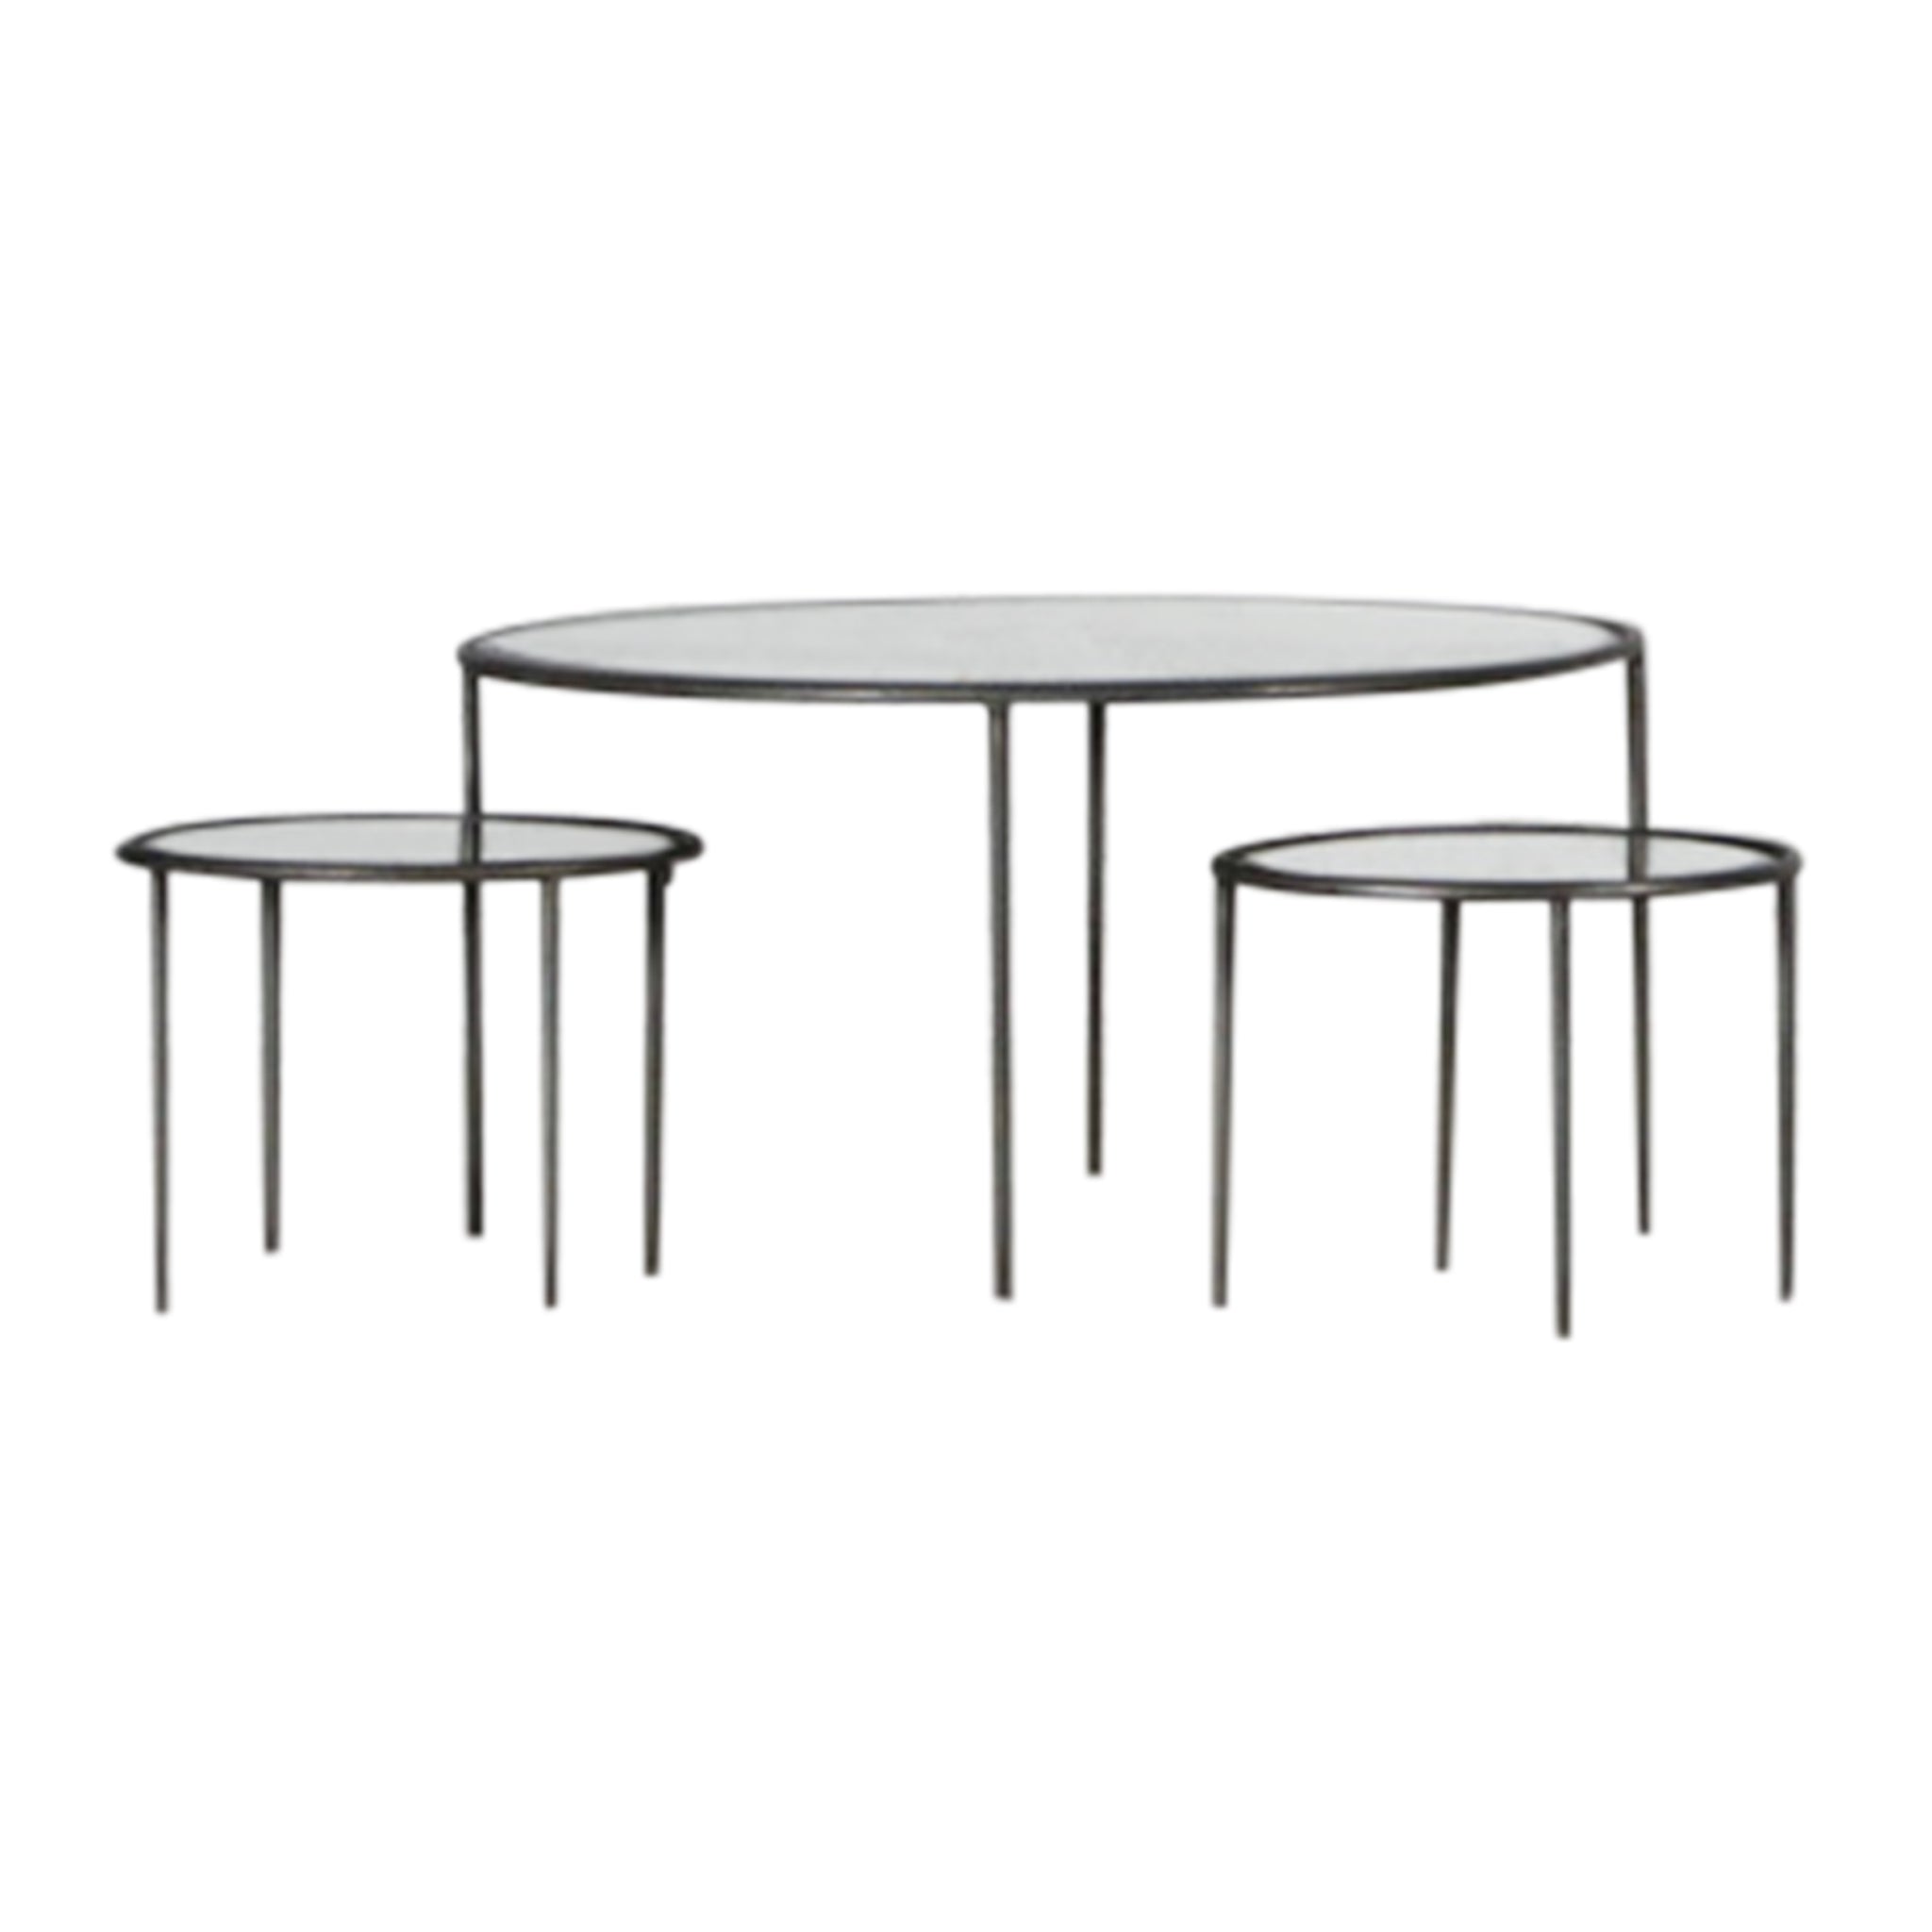 Canaria Nesting Tables